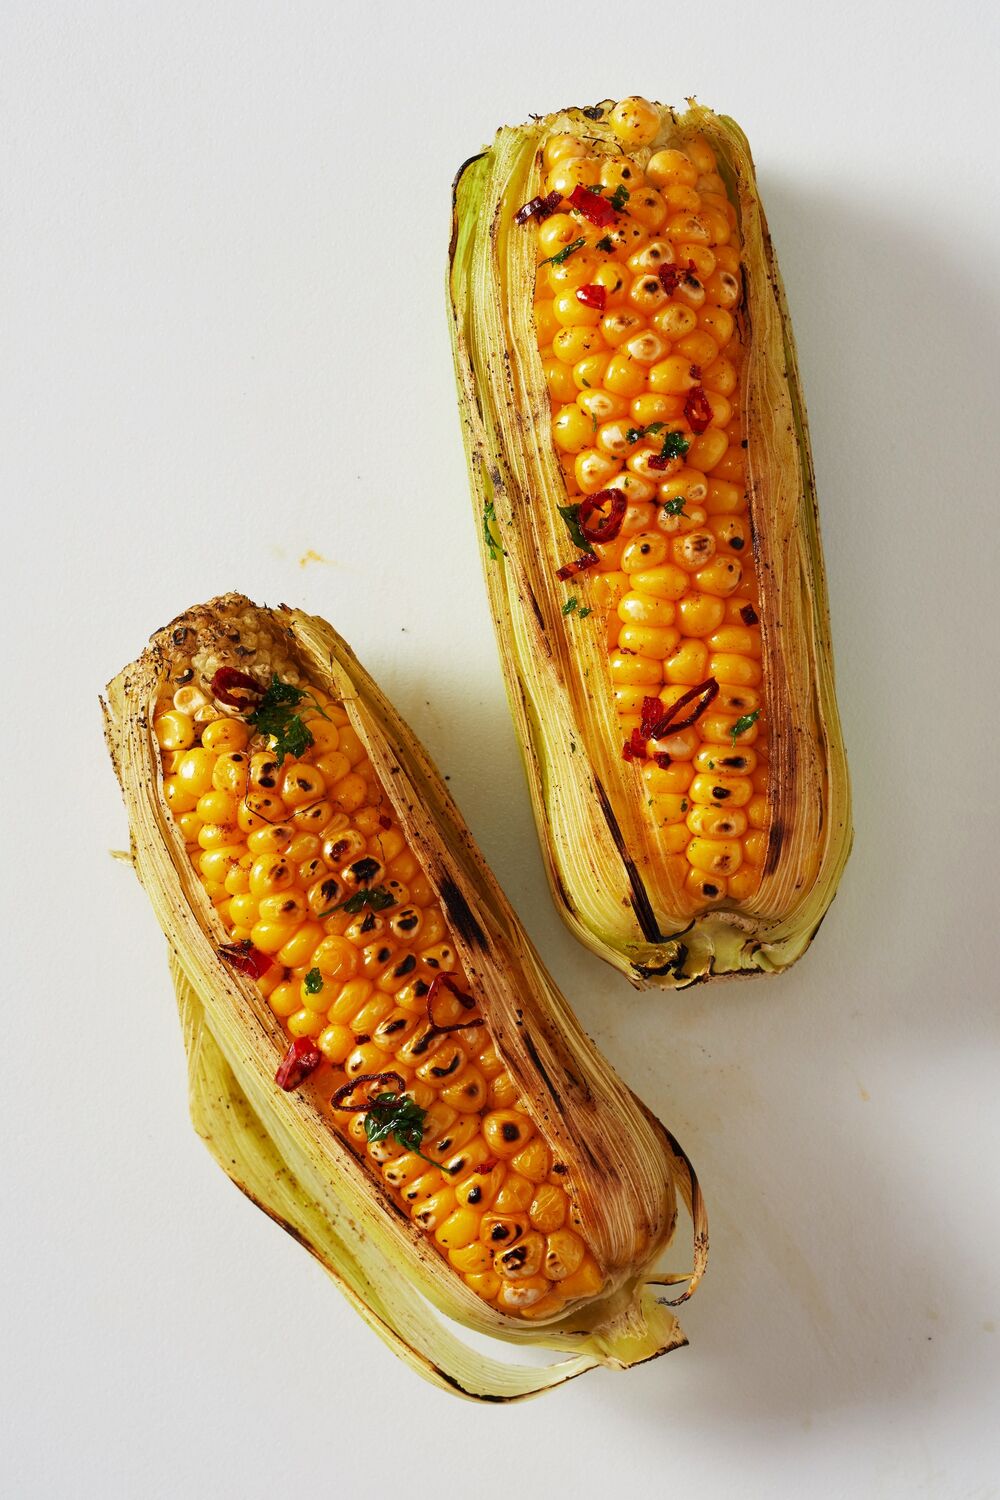 Two corn on the cobs lie side by side on a plain surface. They still have their leaves enveloping them. They have been grilled with butter and spices.